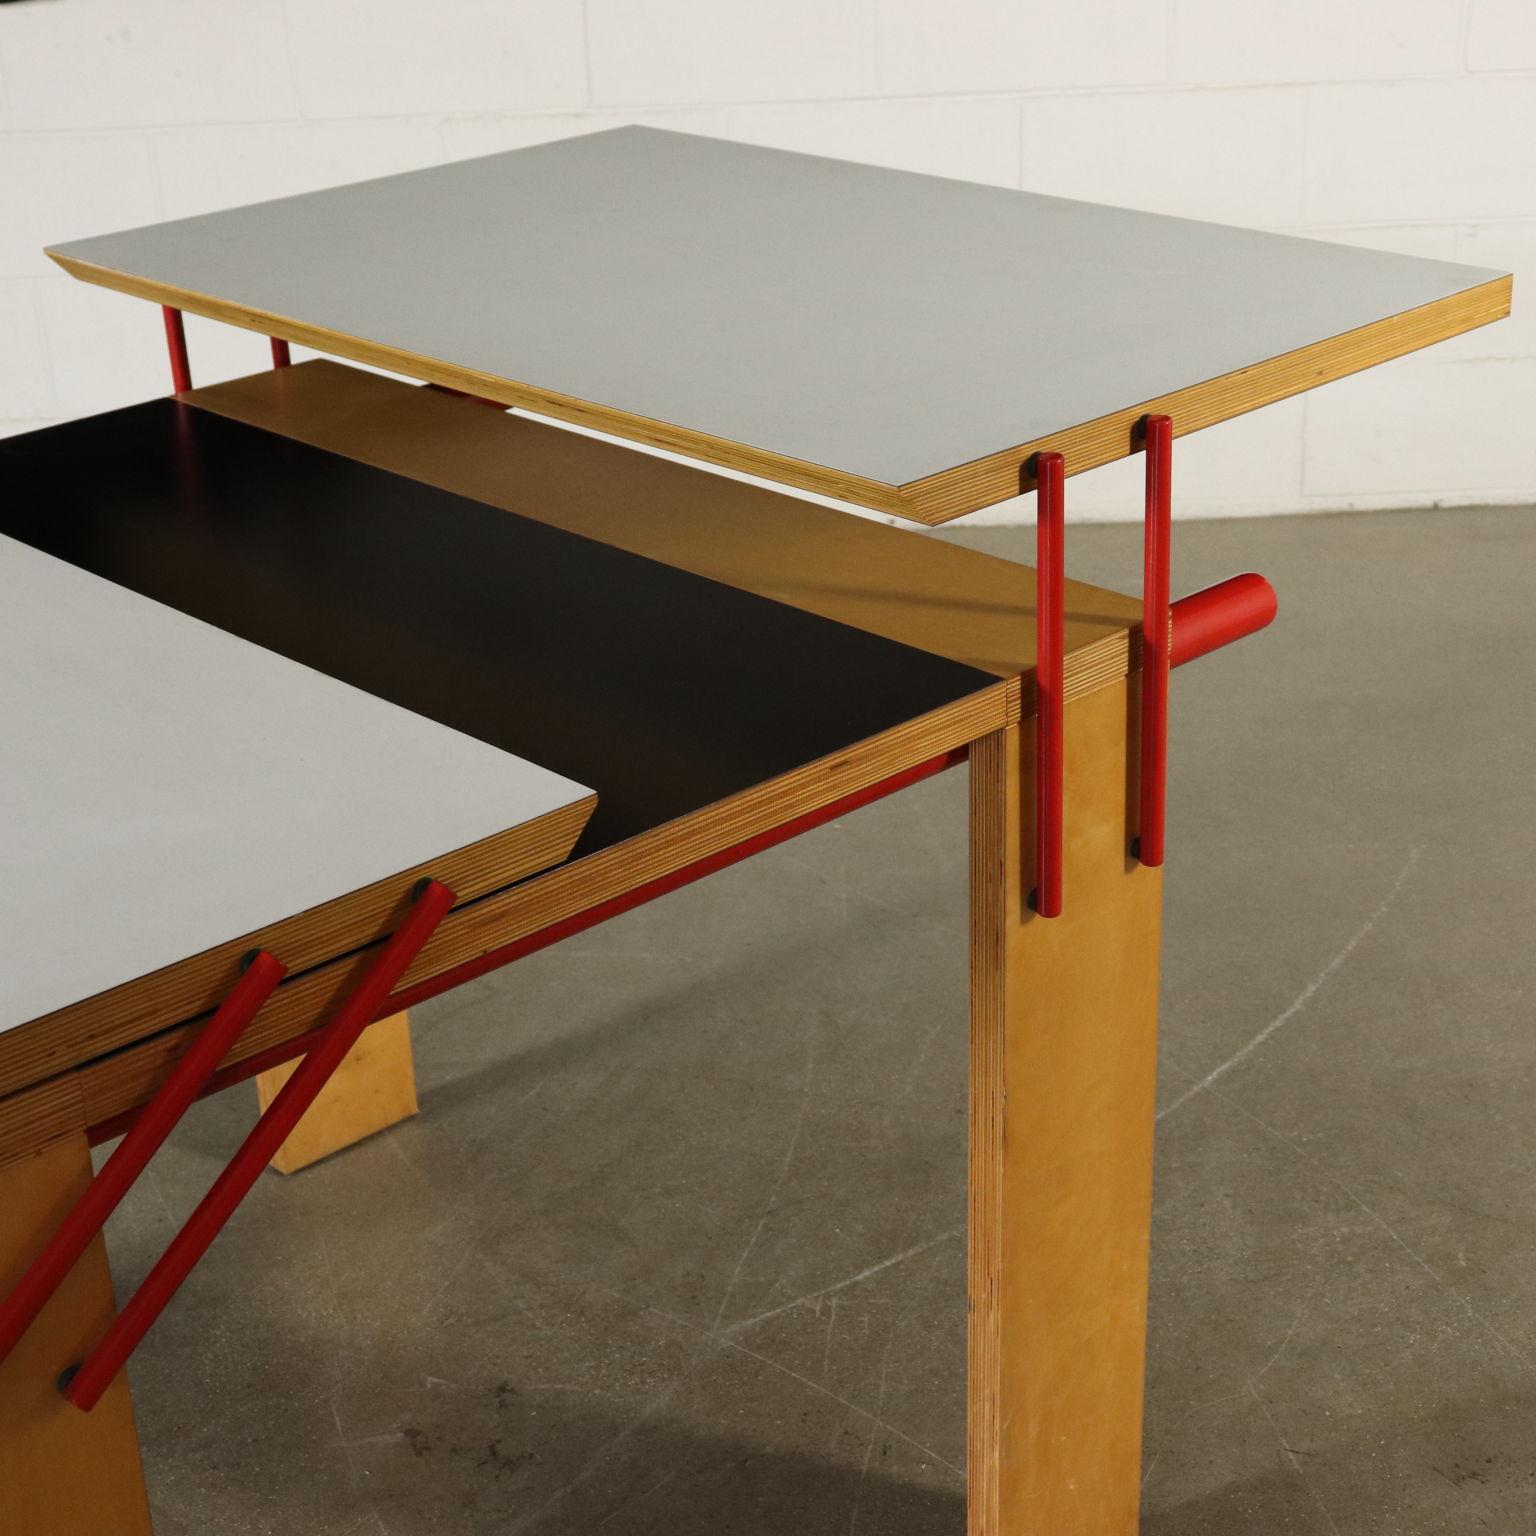 Italian Openable Table by Stefano Stefani for Pallucco, Italy, 1980s